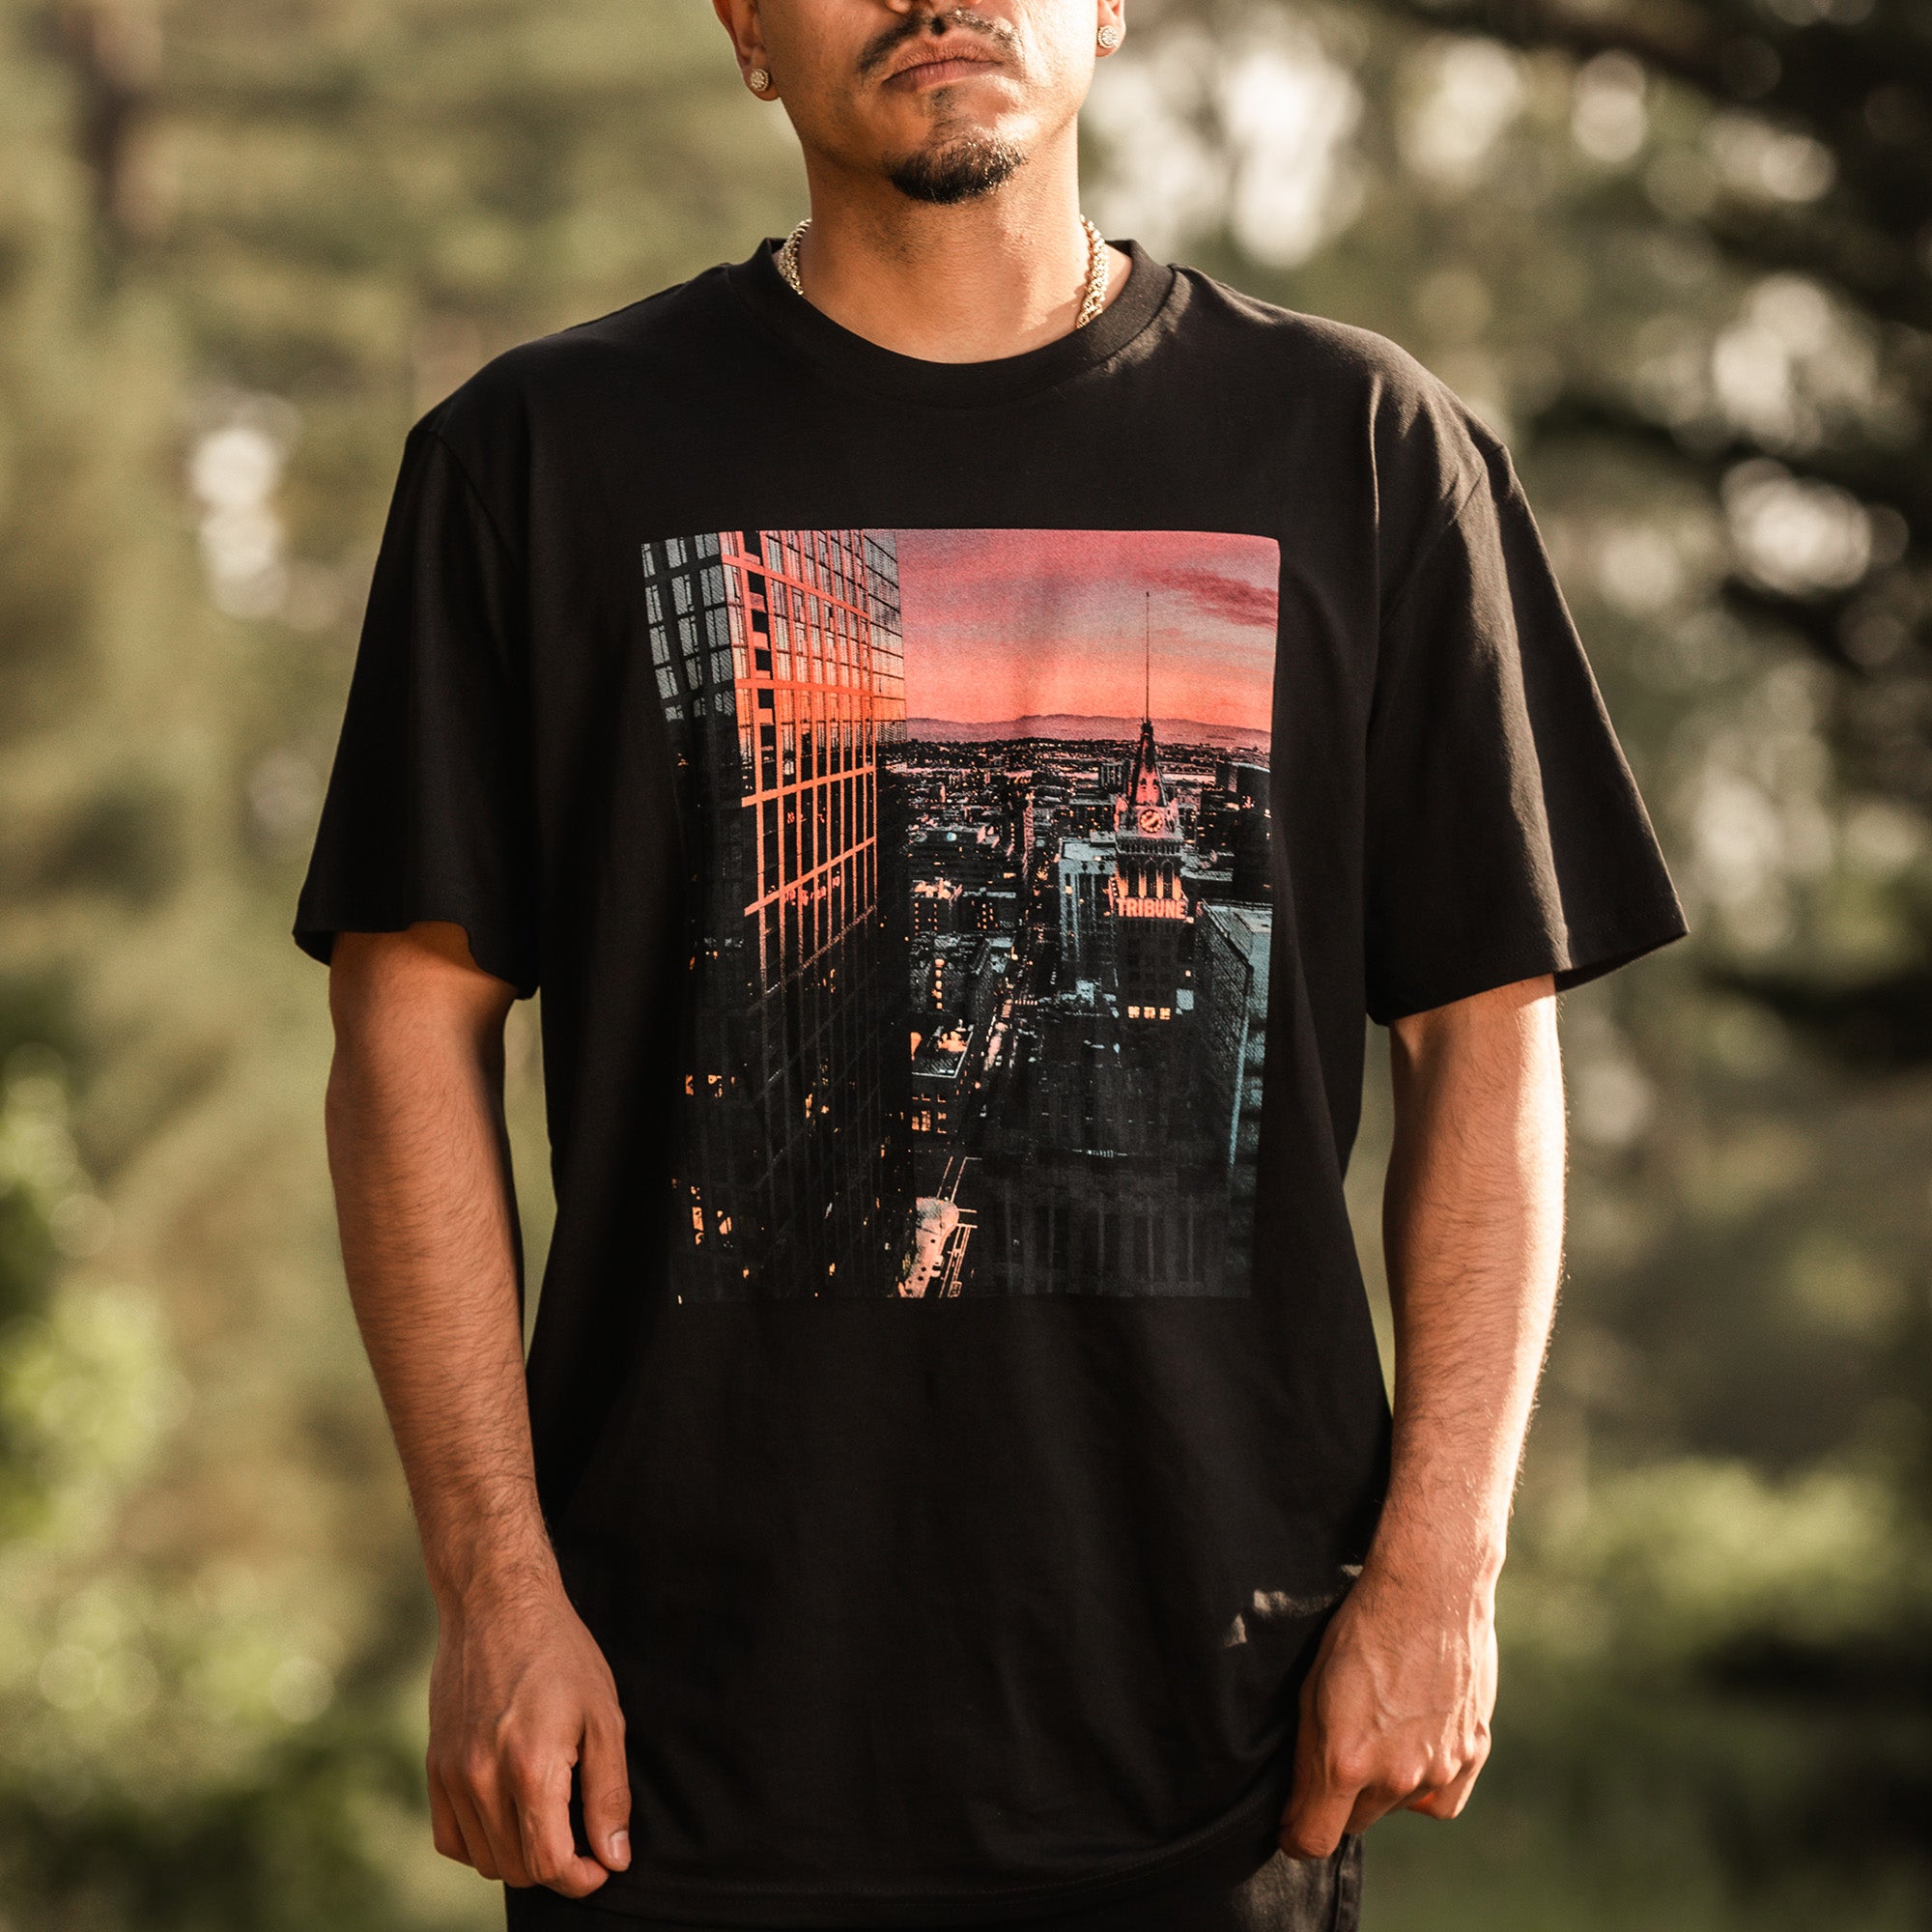 Close-up of a man’s chest outdoors wearing a black tee with Vincent James photography image of the Oakland Tribune building and the Downtown Oakland landscape at sunset.